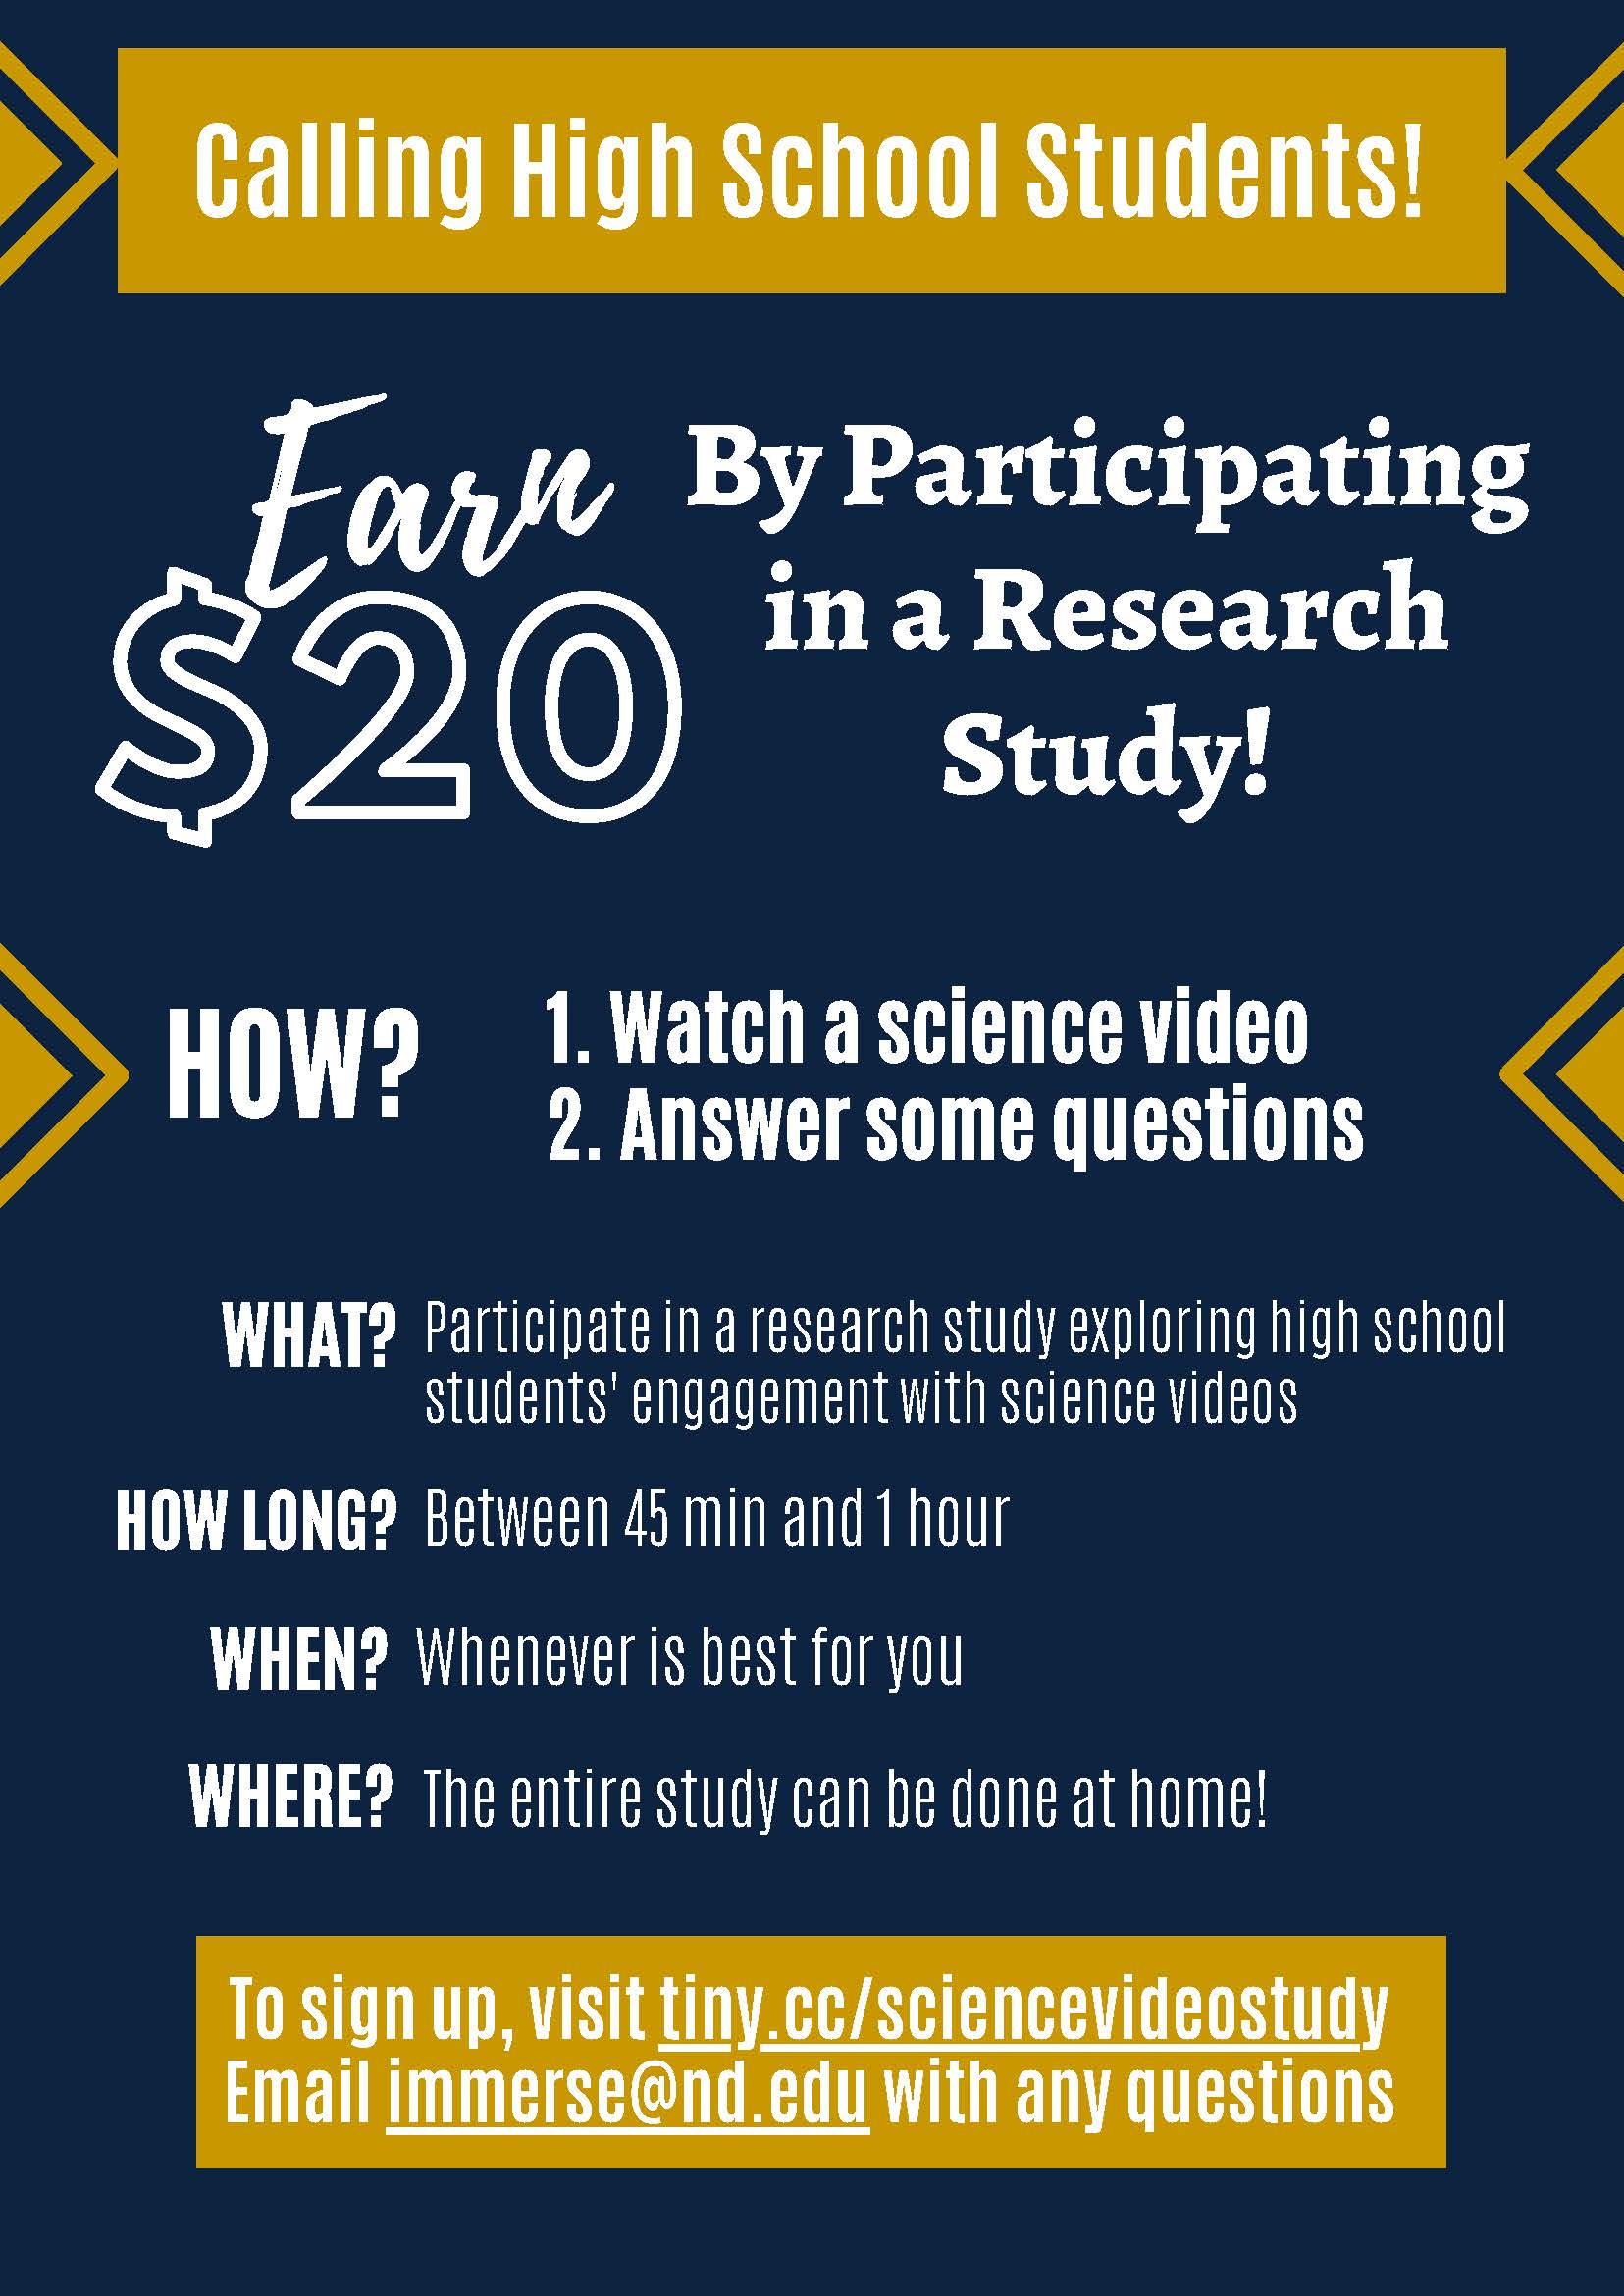 ND Science Video Study Recruitment Flyer